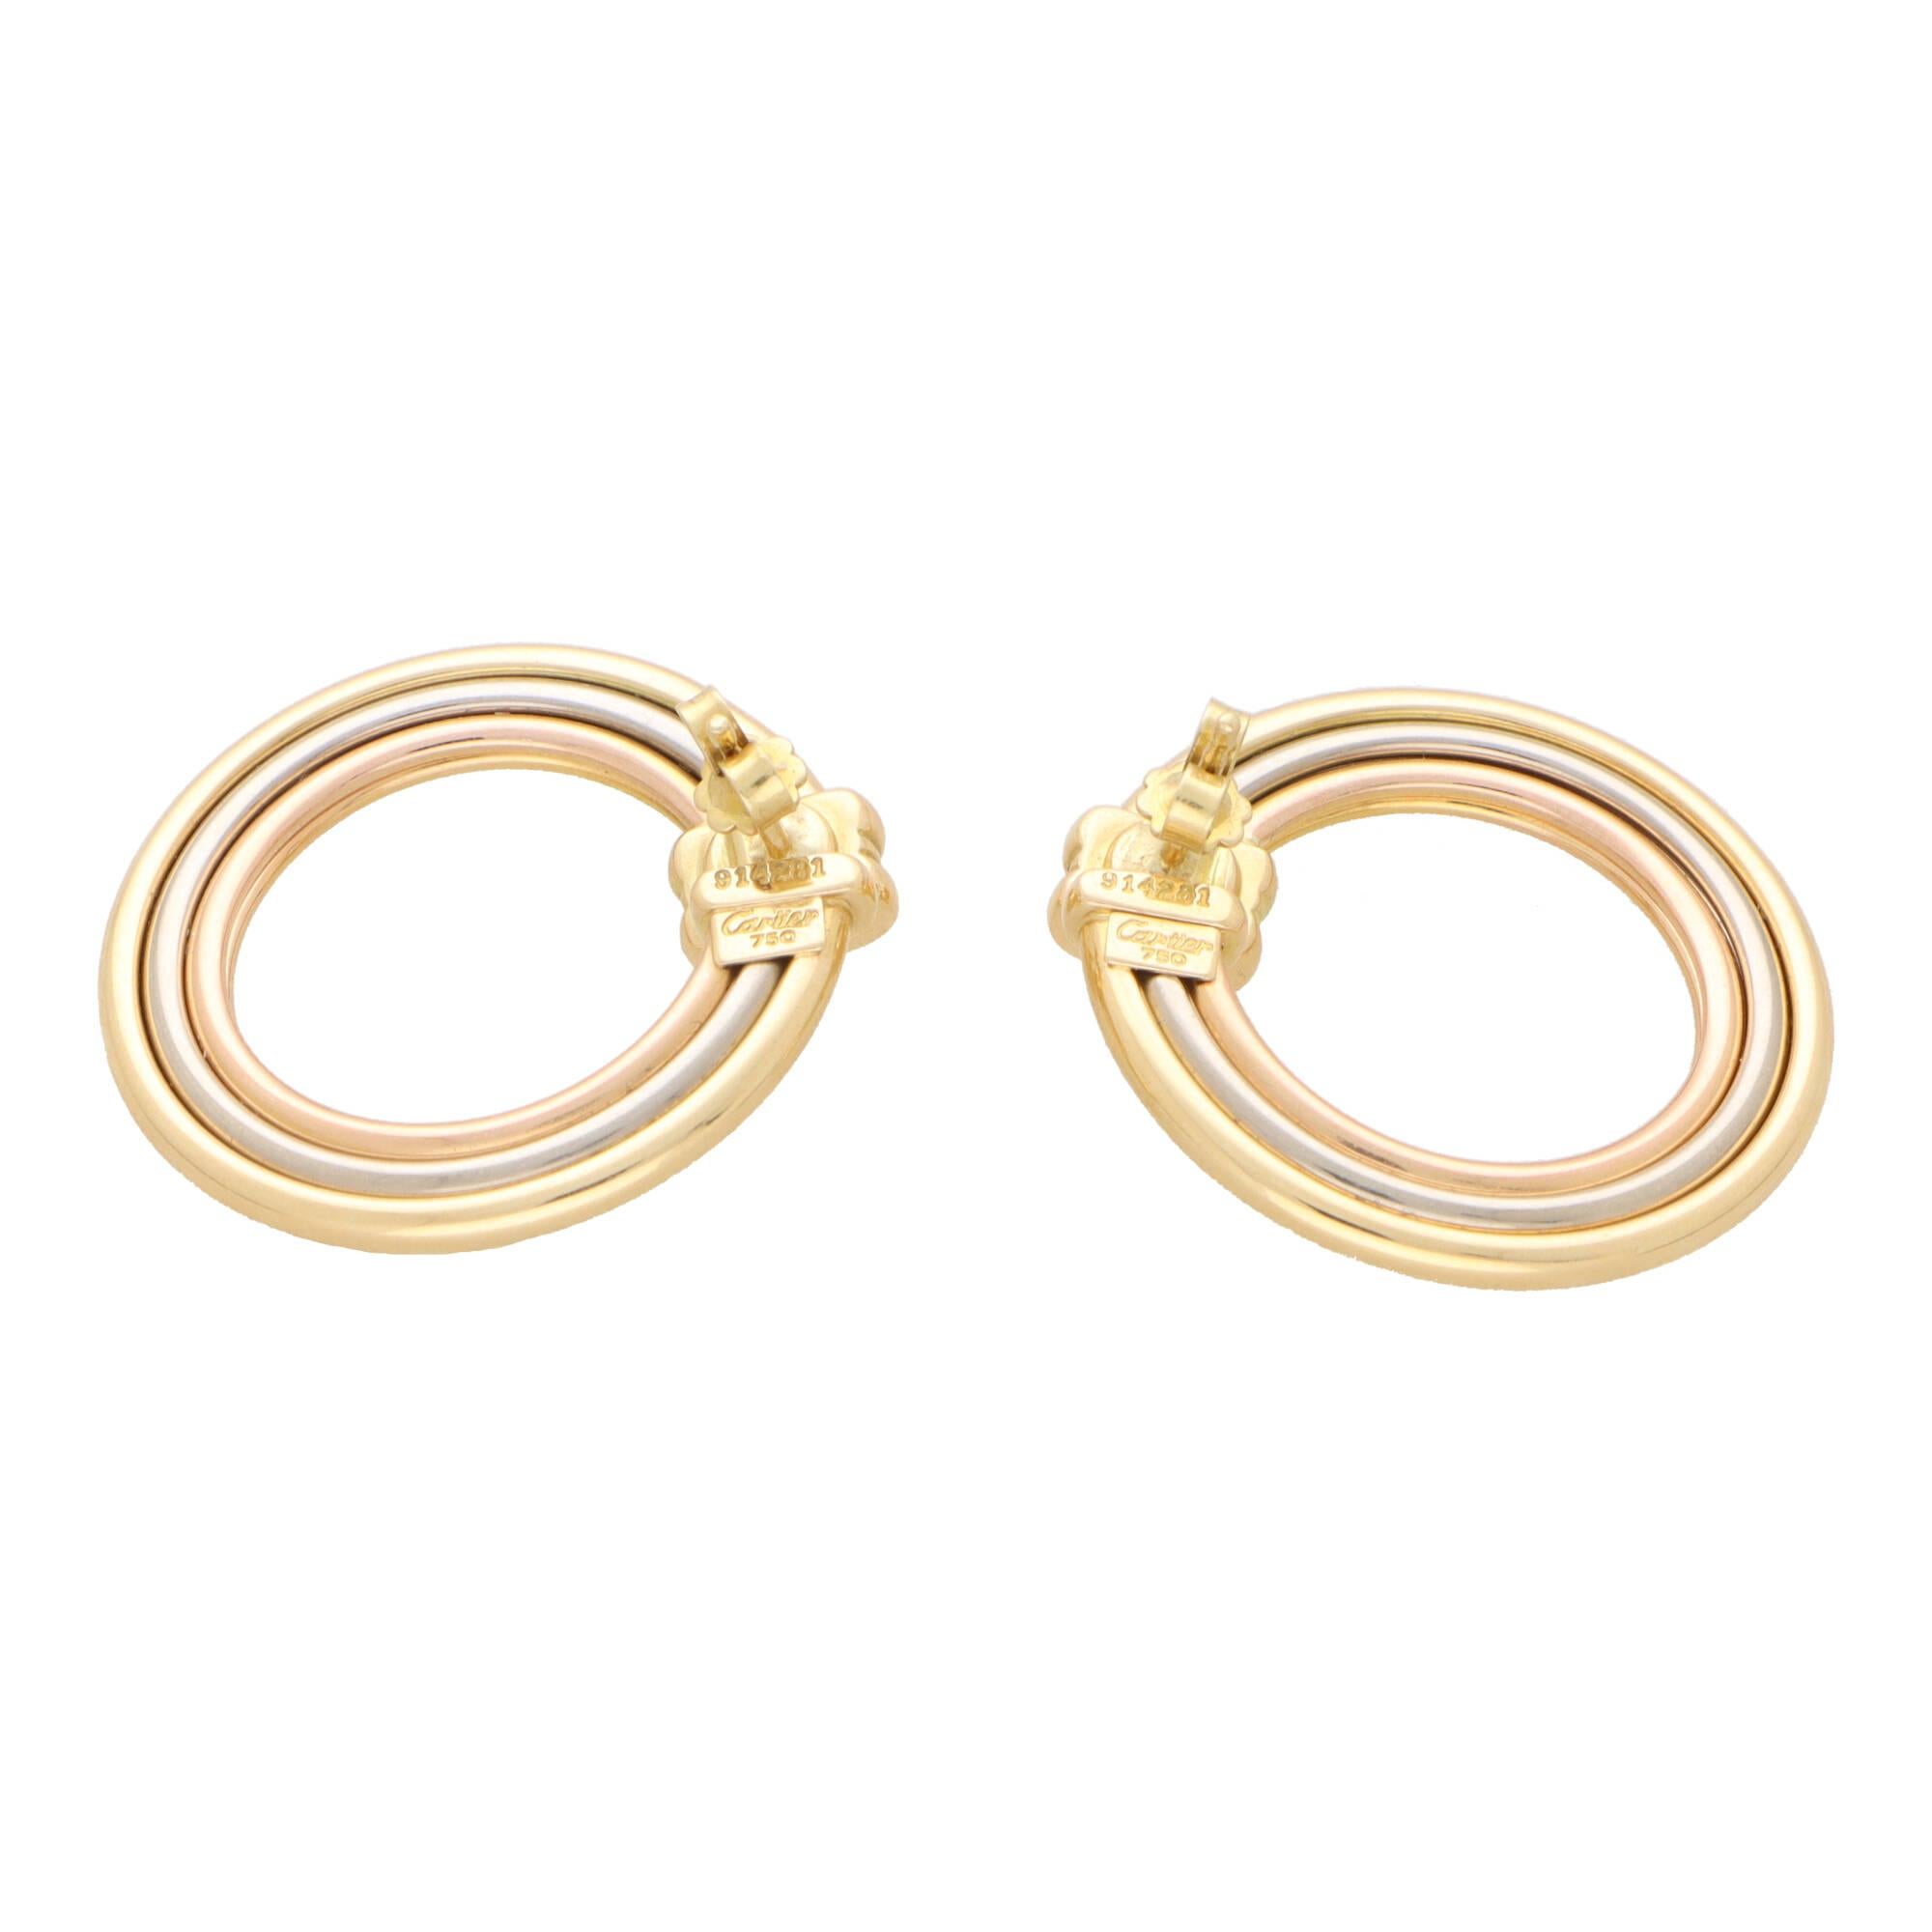 A fantastic pair of vintage Cartier trinity hoop earrings set in 18k yellow, rose and white gold.

Each earring consists of a large half hoop, designed in the iconic trinity gold colours. The earrings are designed to hug the lobe giving the illusion